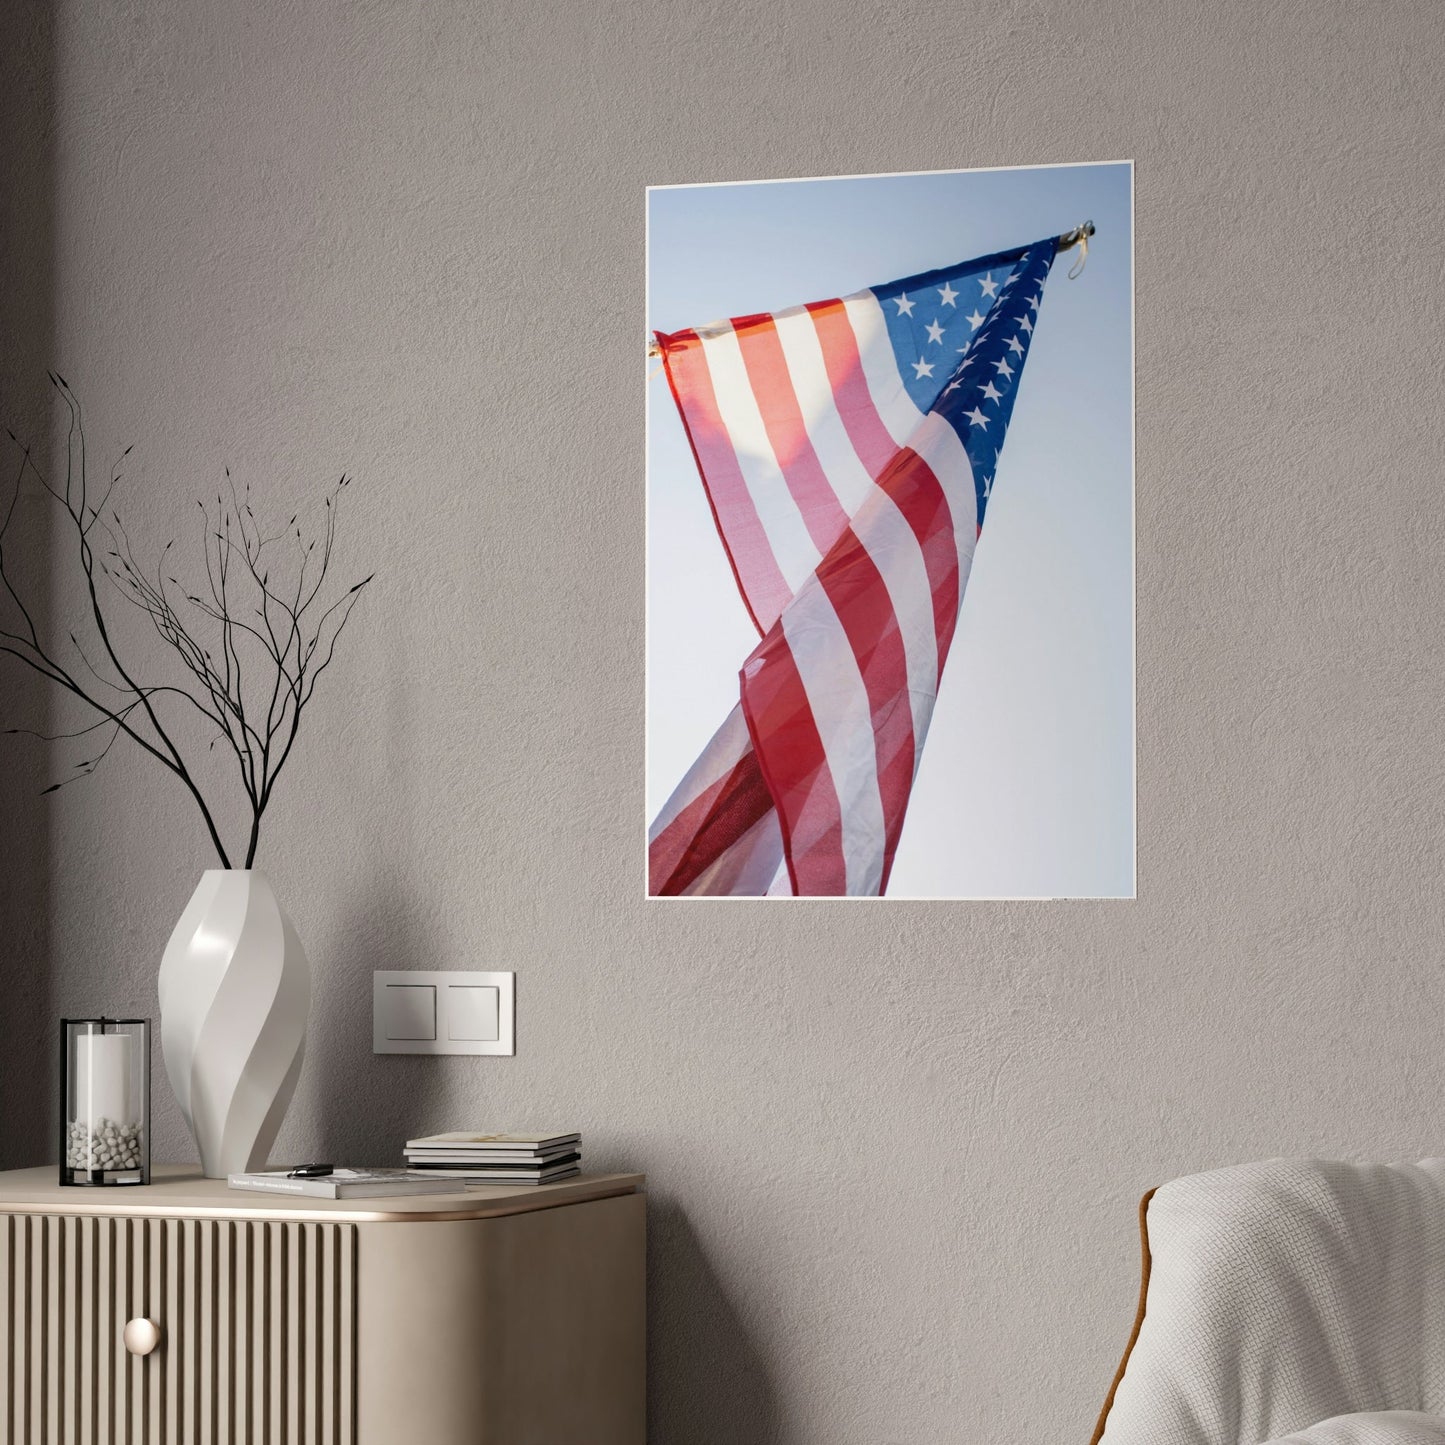 United States of America: Framed Canvas & Poster Art with the Flag